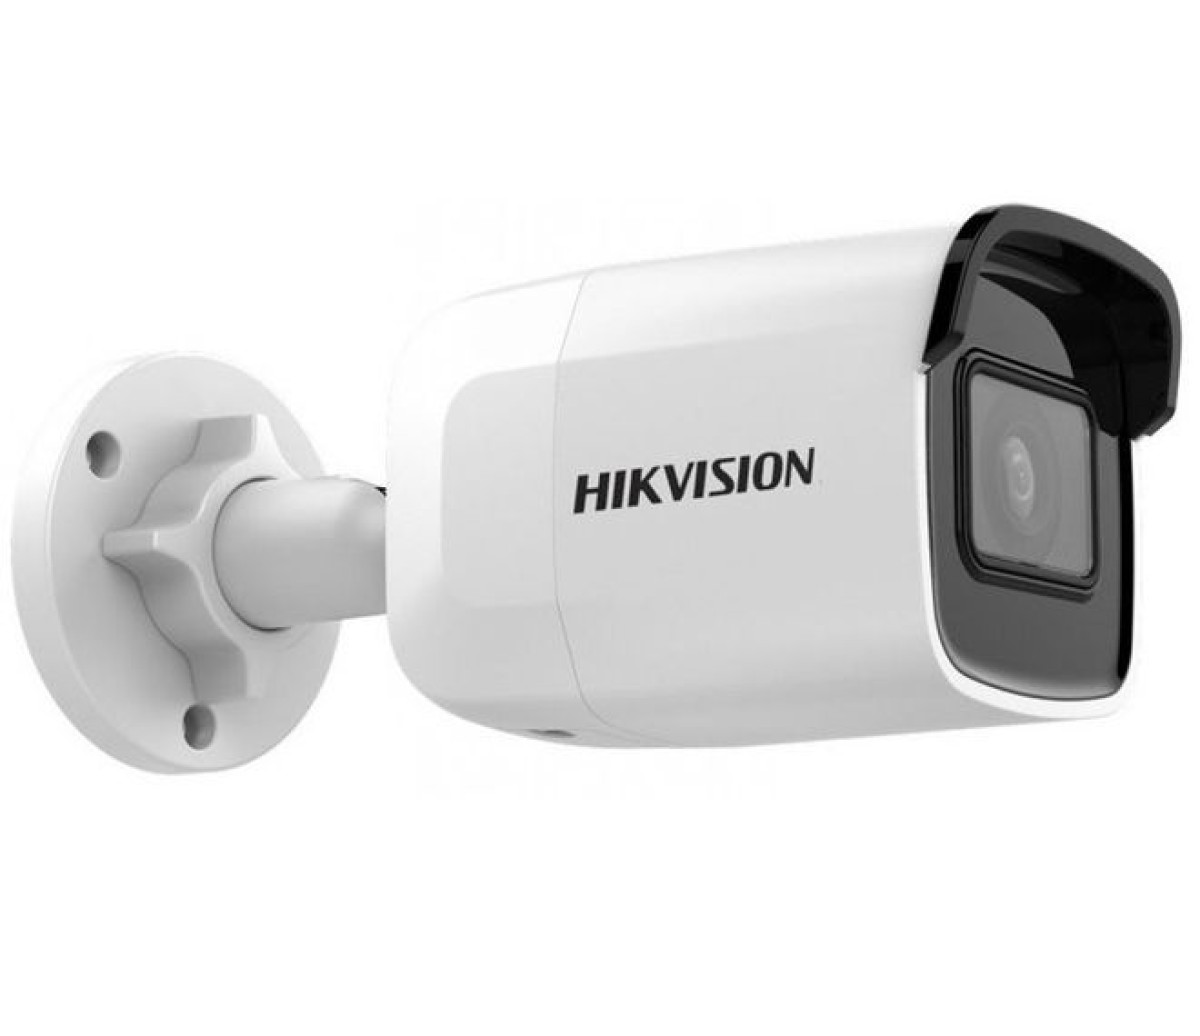 IP-камера Hikvision DS-2CD2021G1-IW (2.8) 98_85.jpg